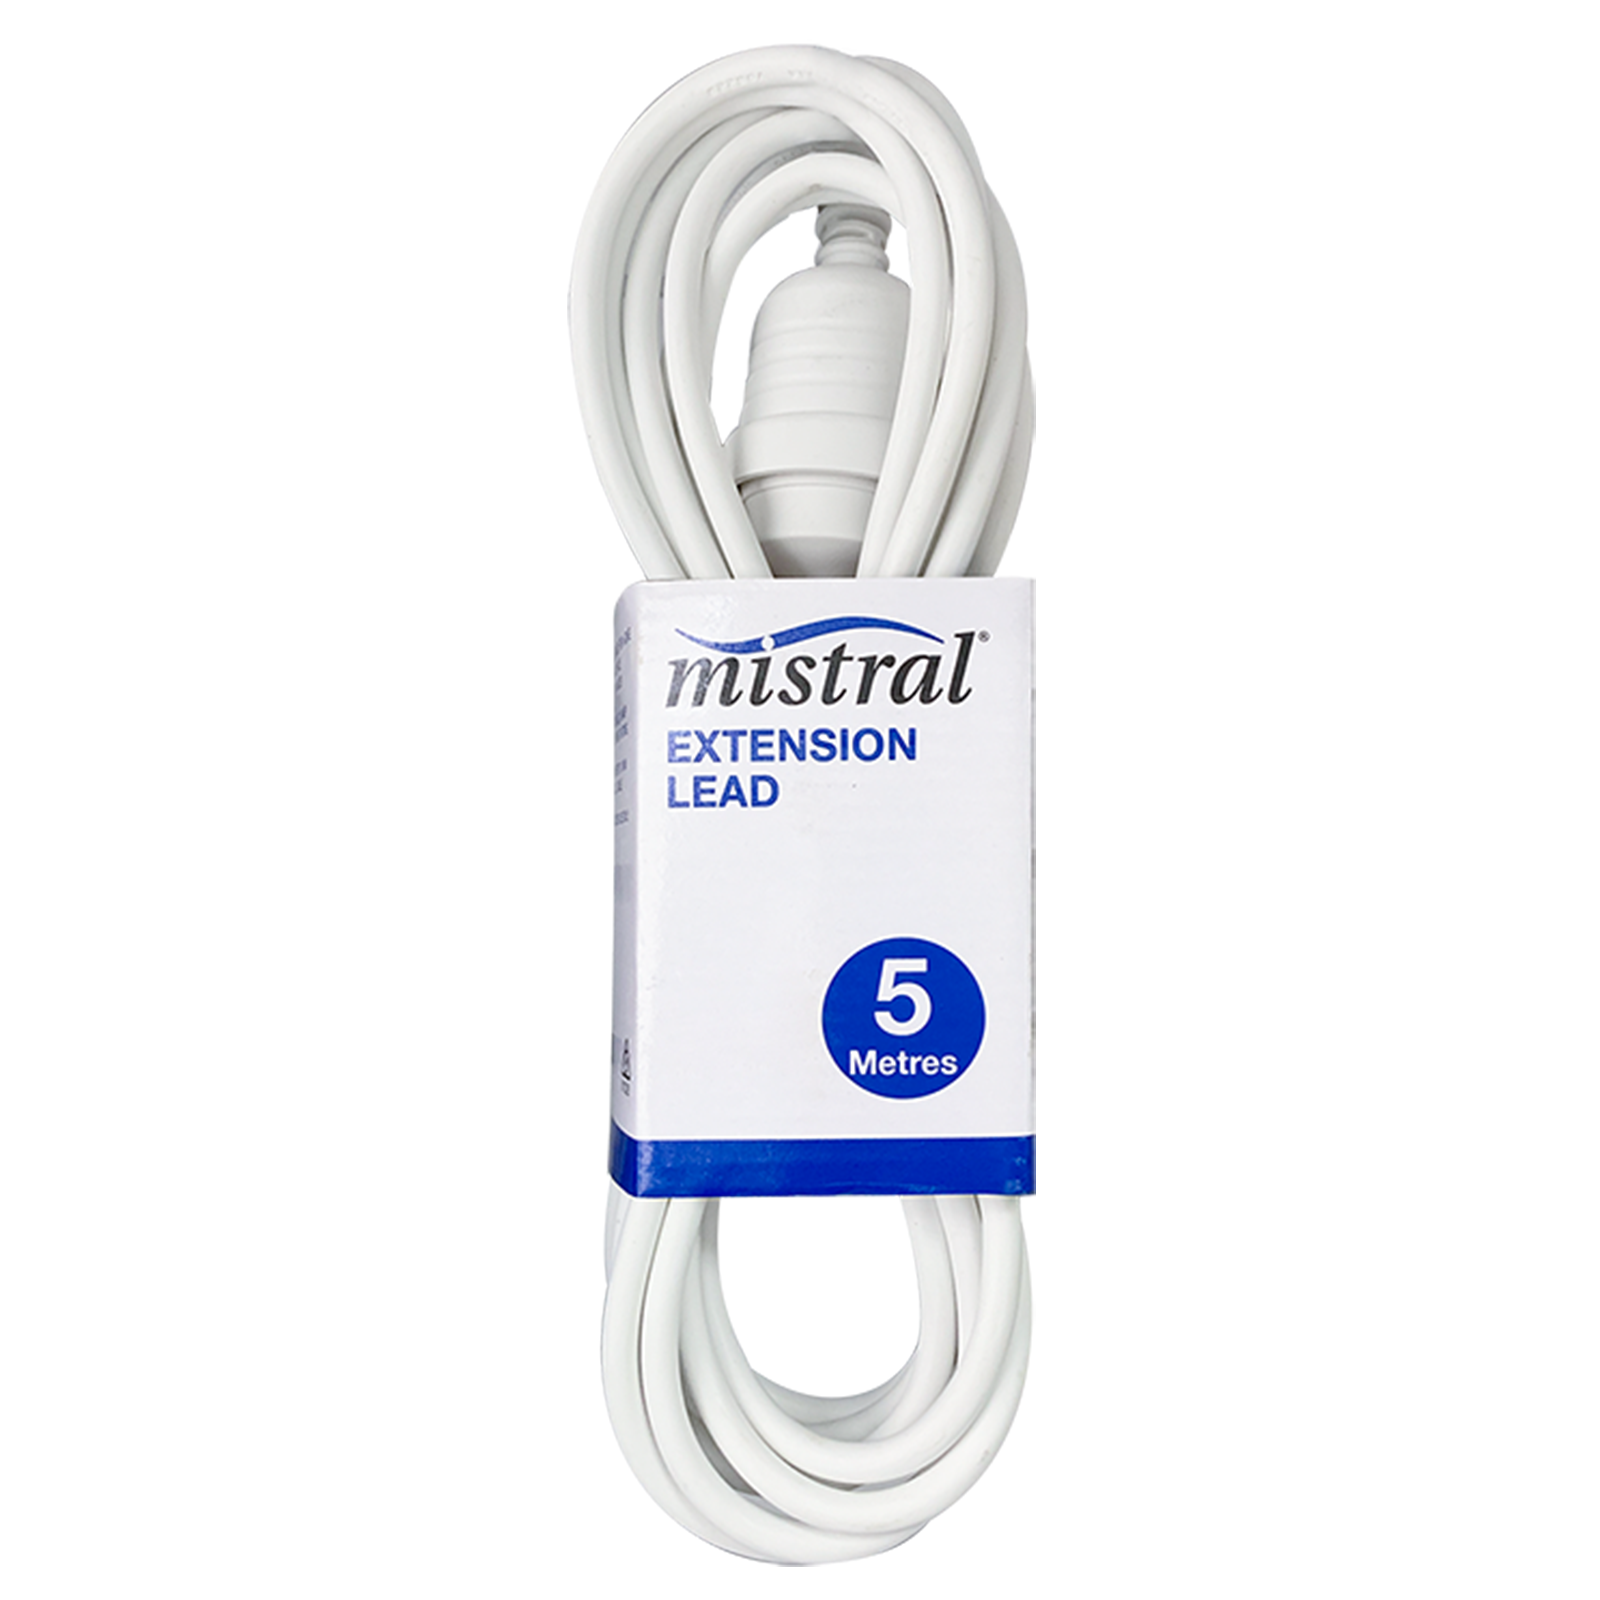 Keep your devices connected with the Mistral 5m Extension Lead